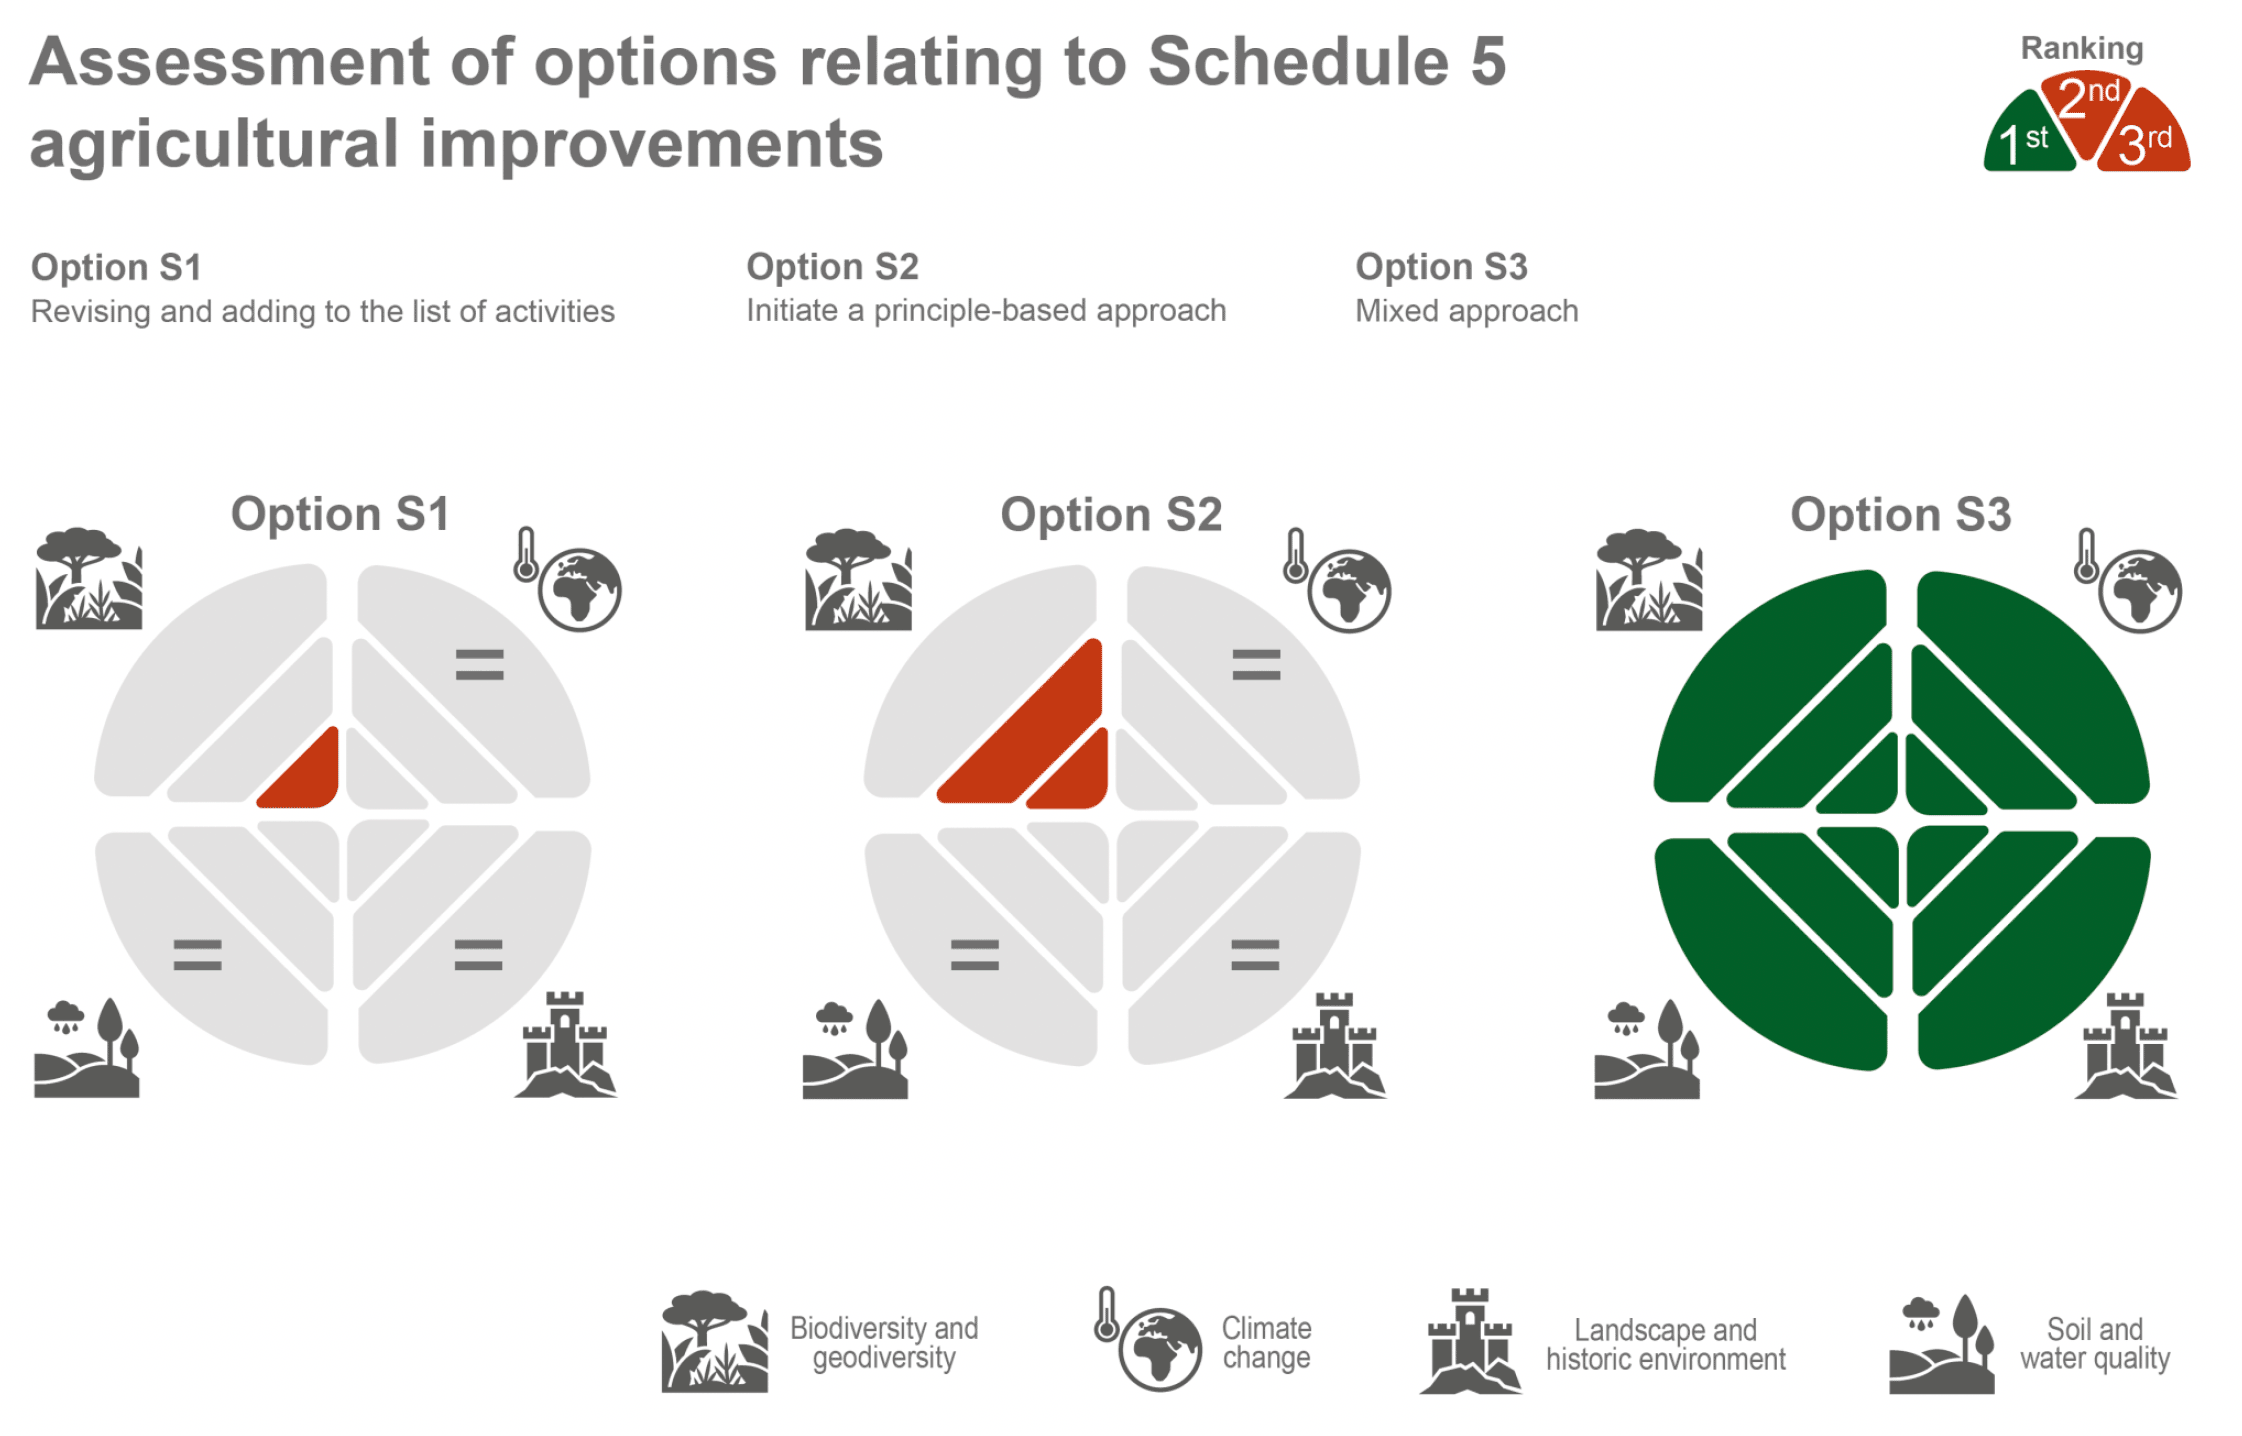 Infographic showing the assessment results of the three options relating to Schedule 5 agricultural improvements.  Option S3 performs most favourably, ranking first under all four SEA topics, followed by Option S2 and Option S1.